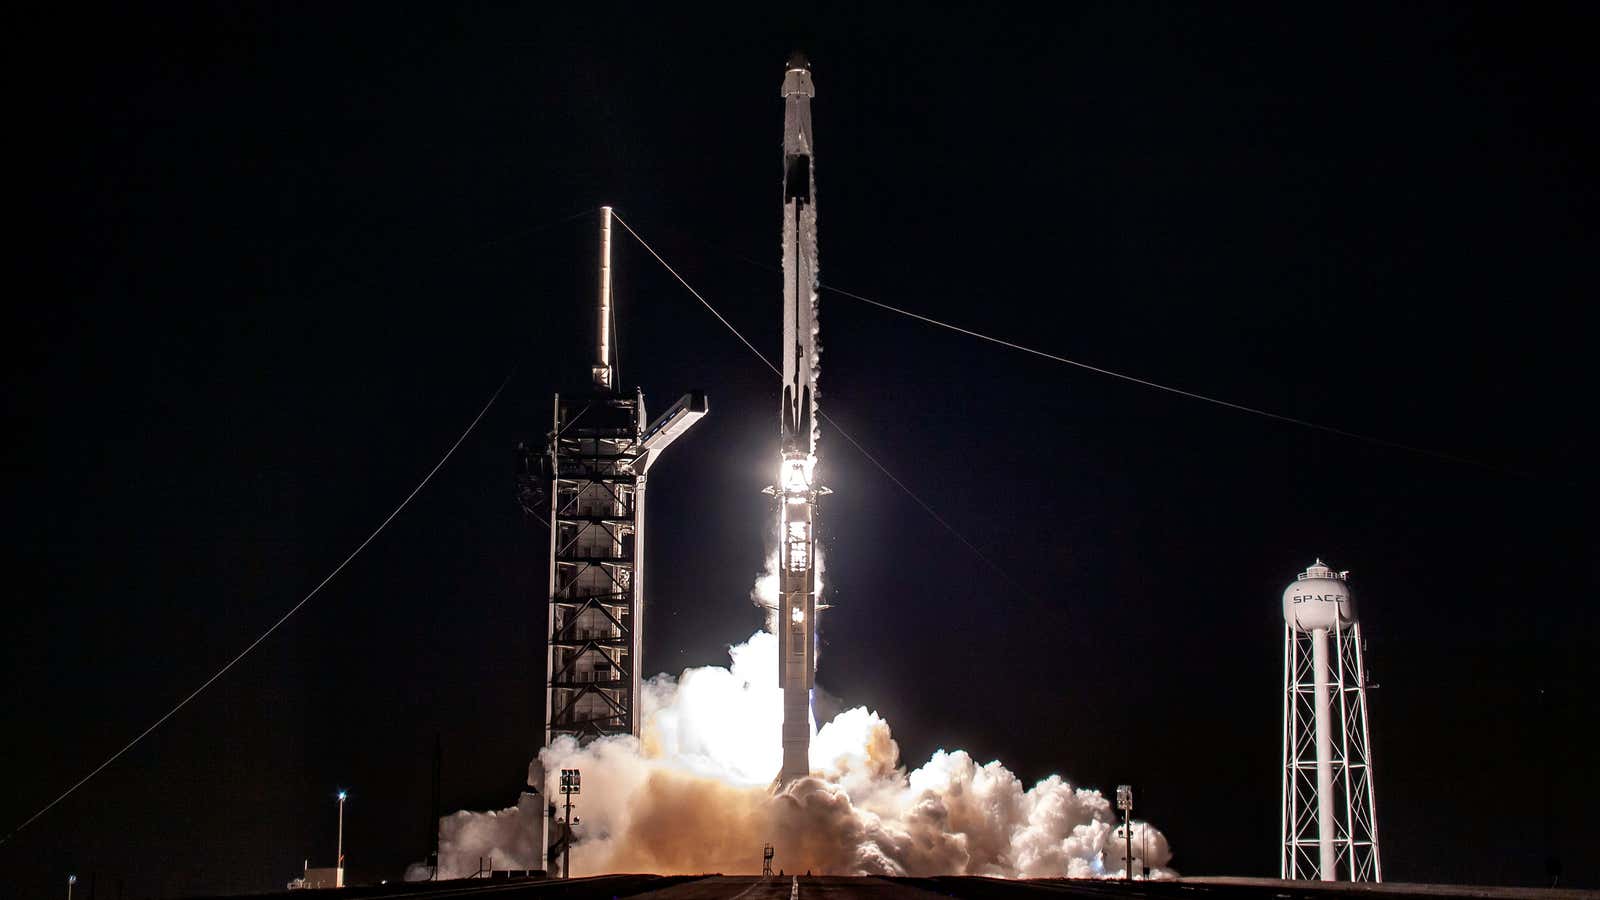 Today’s Falcon 9 rocket takes off during a March 2019 launch.